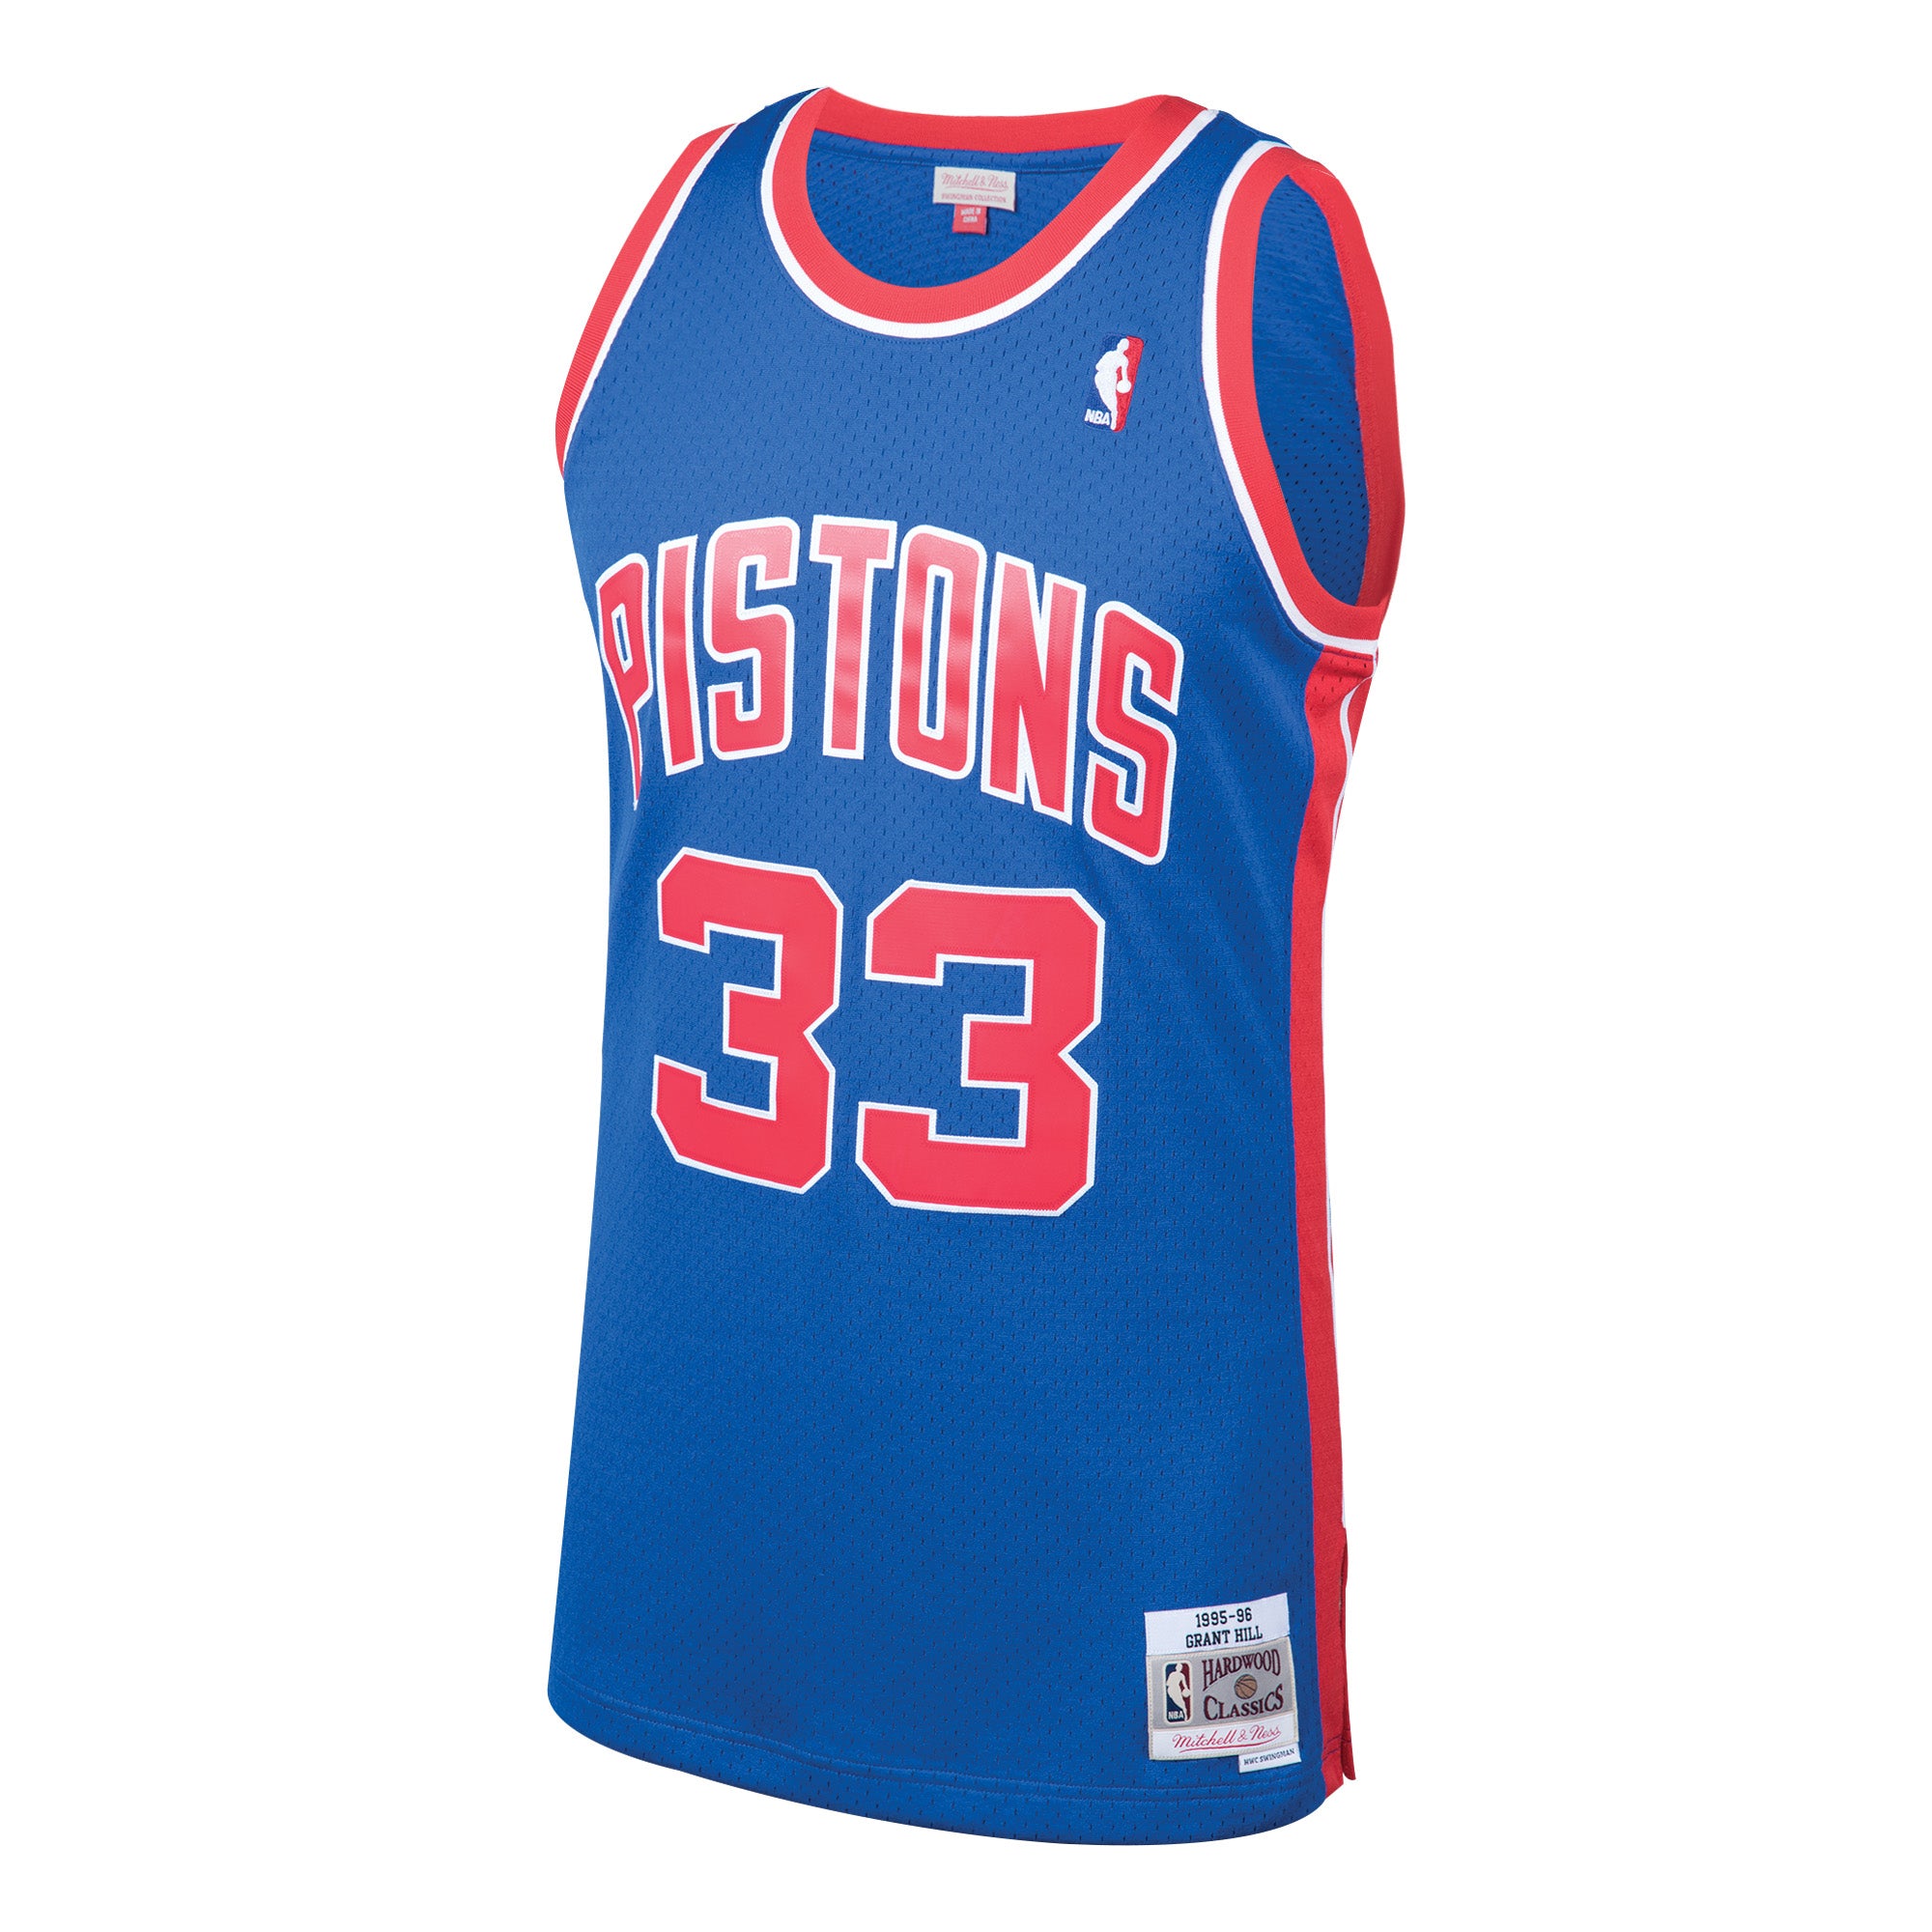 Detroit Pistons Big and Tall jersey